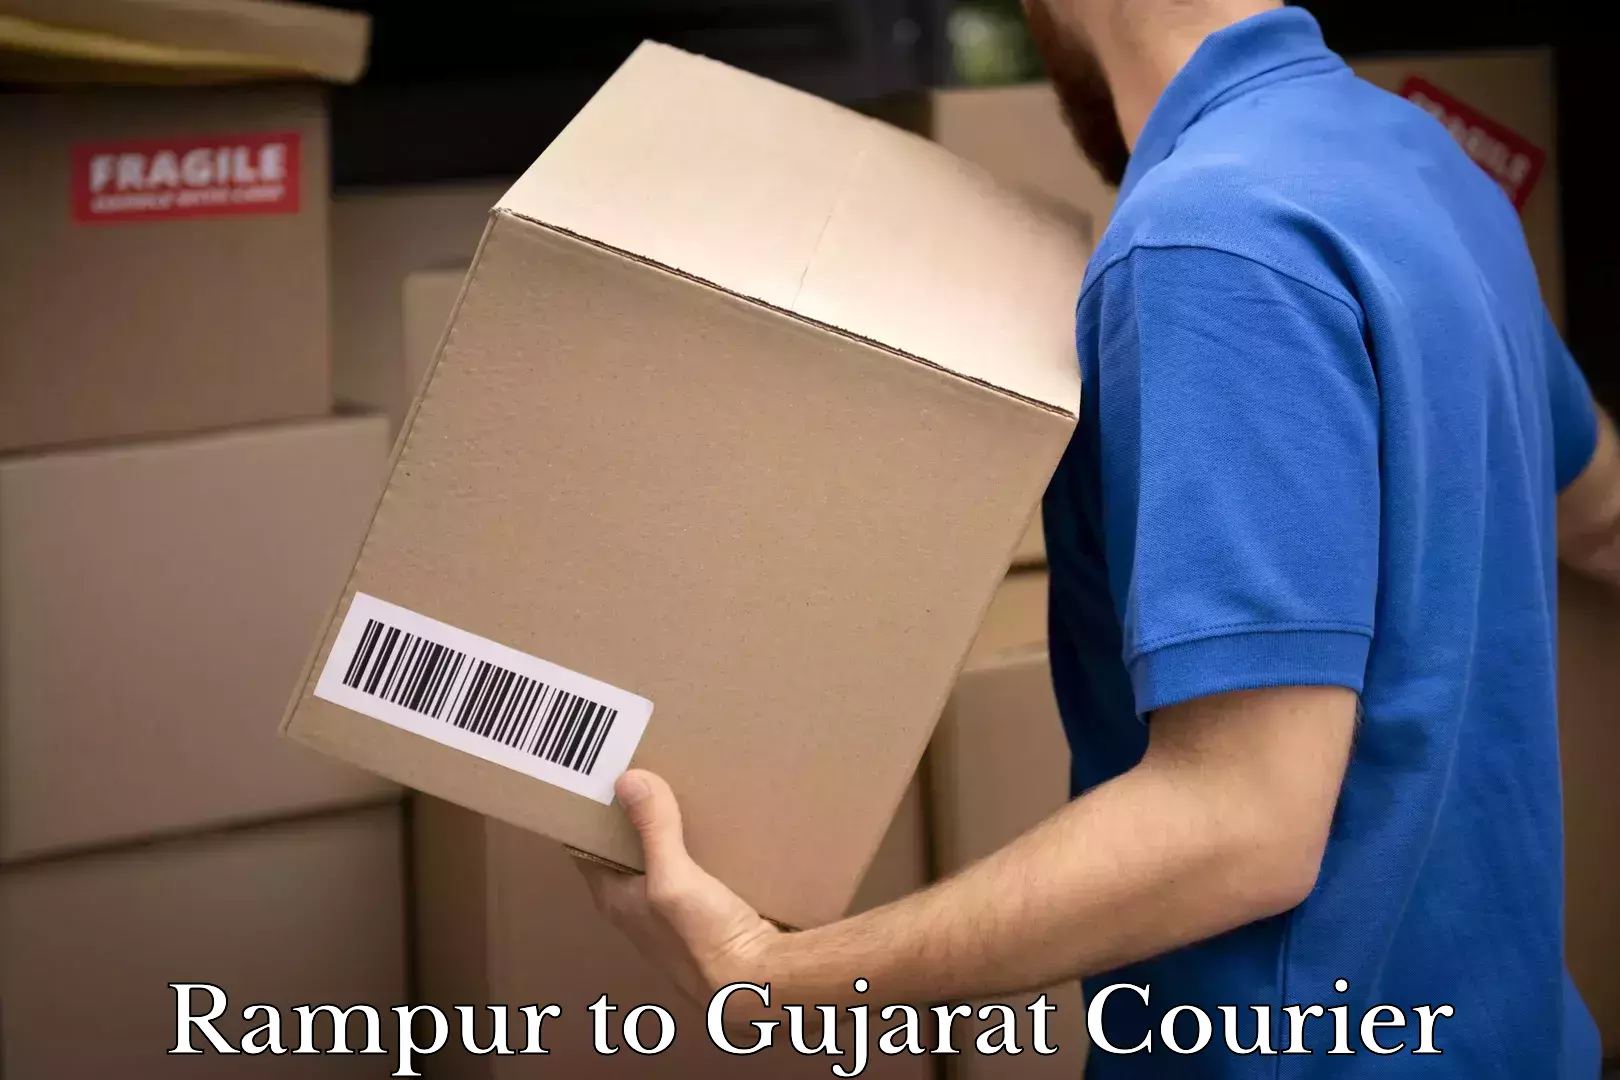 International courier networks Rampur to Gujarat